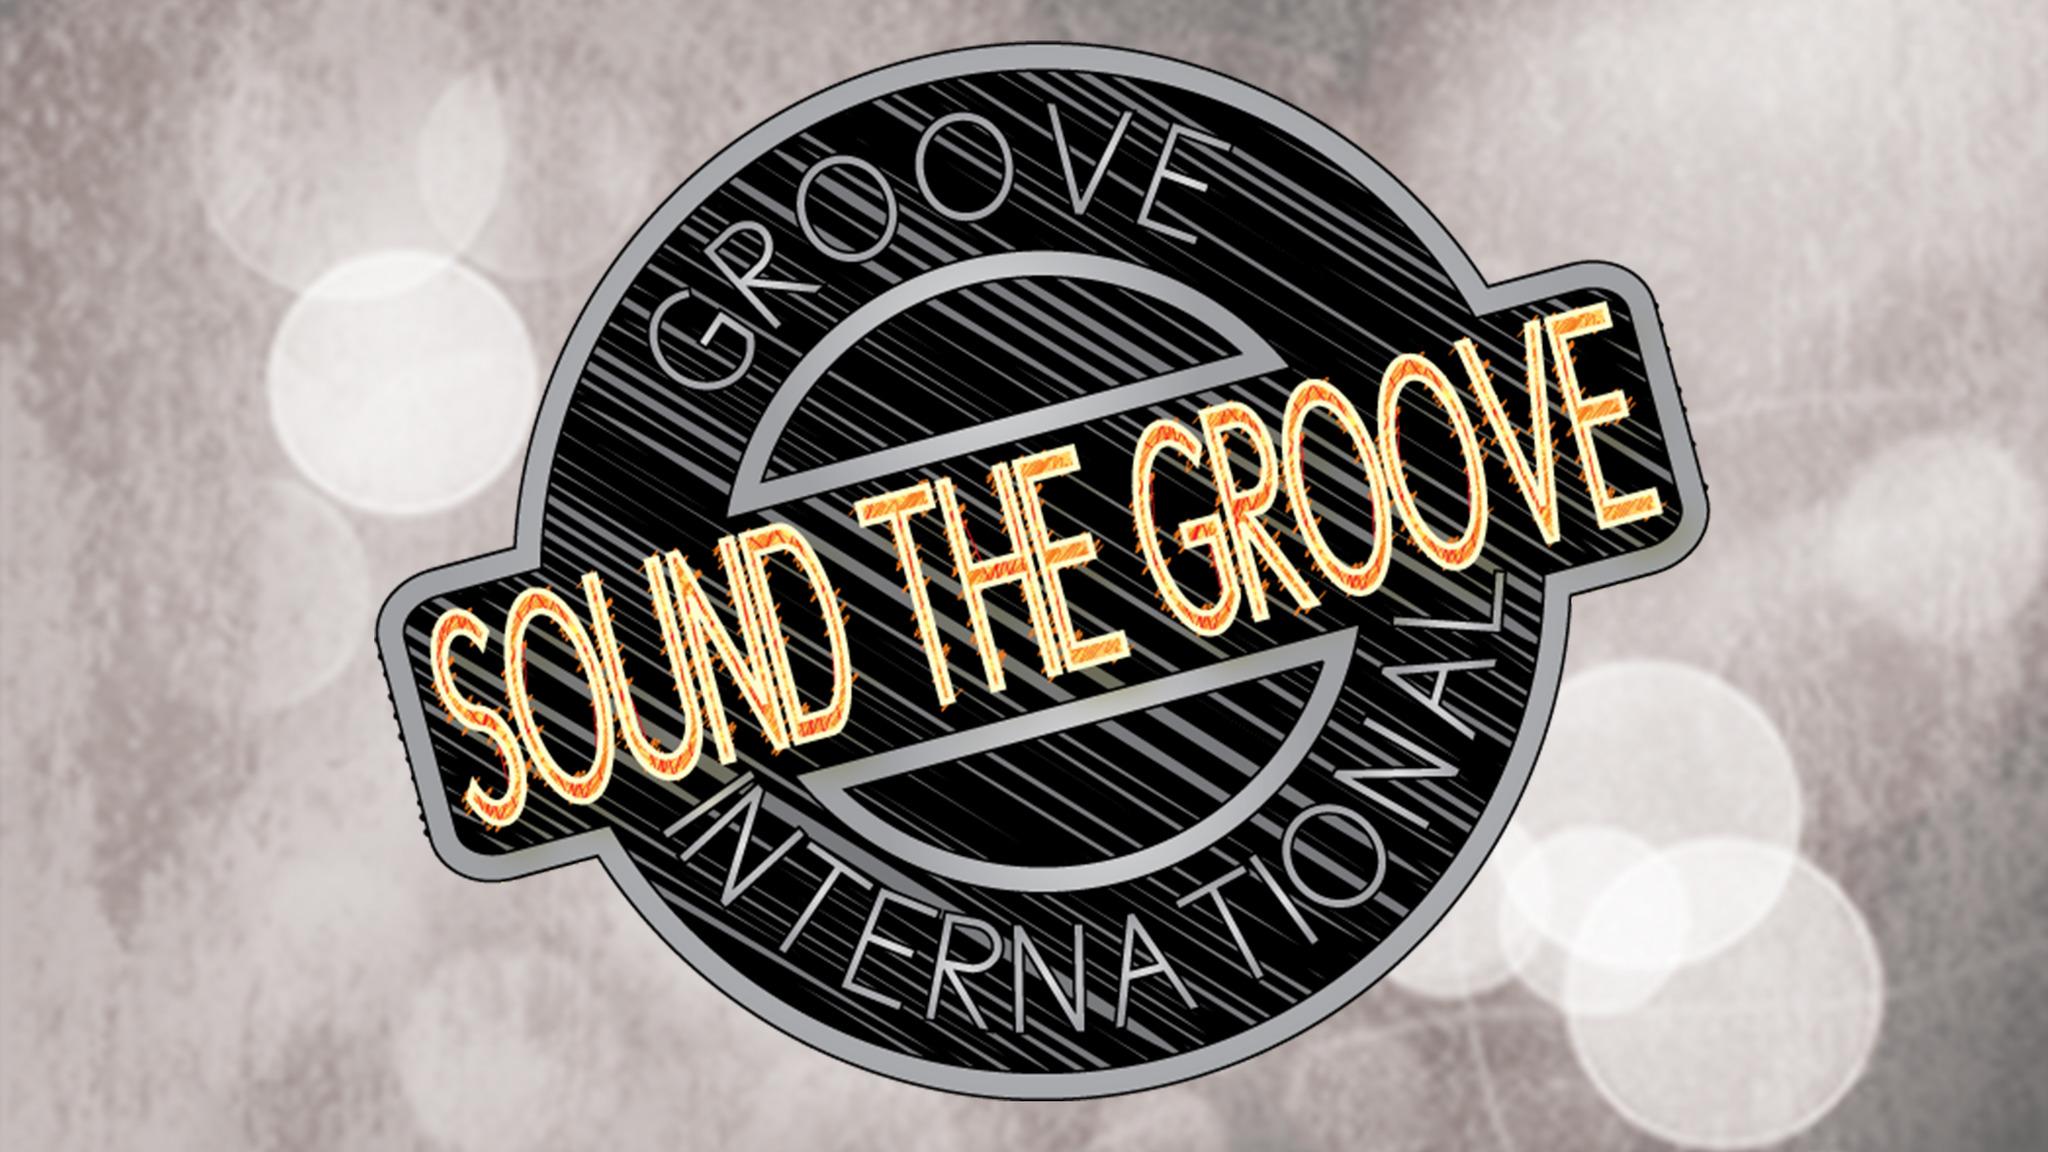 Sound The Groove